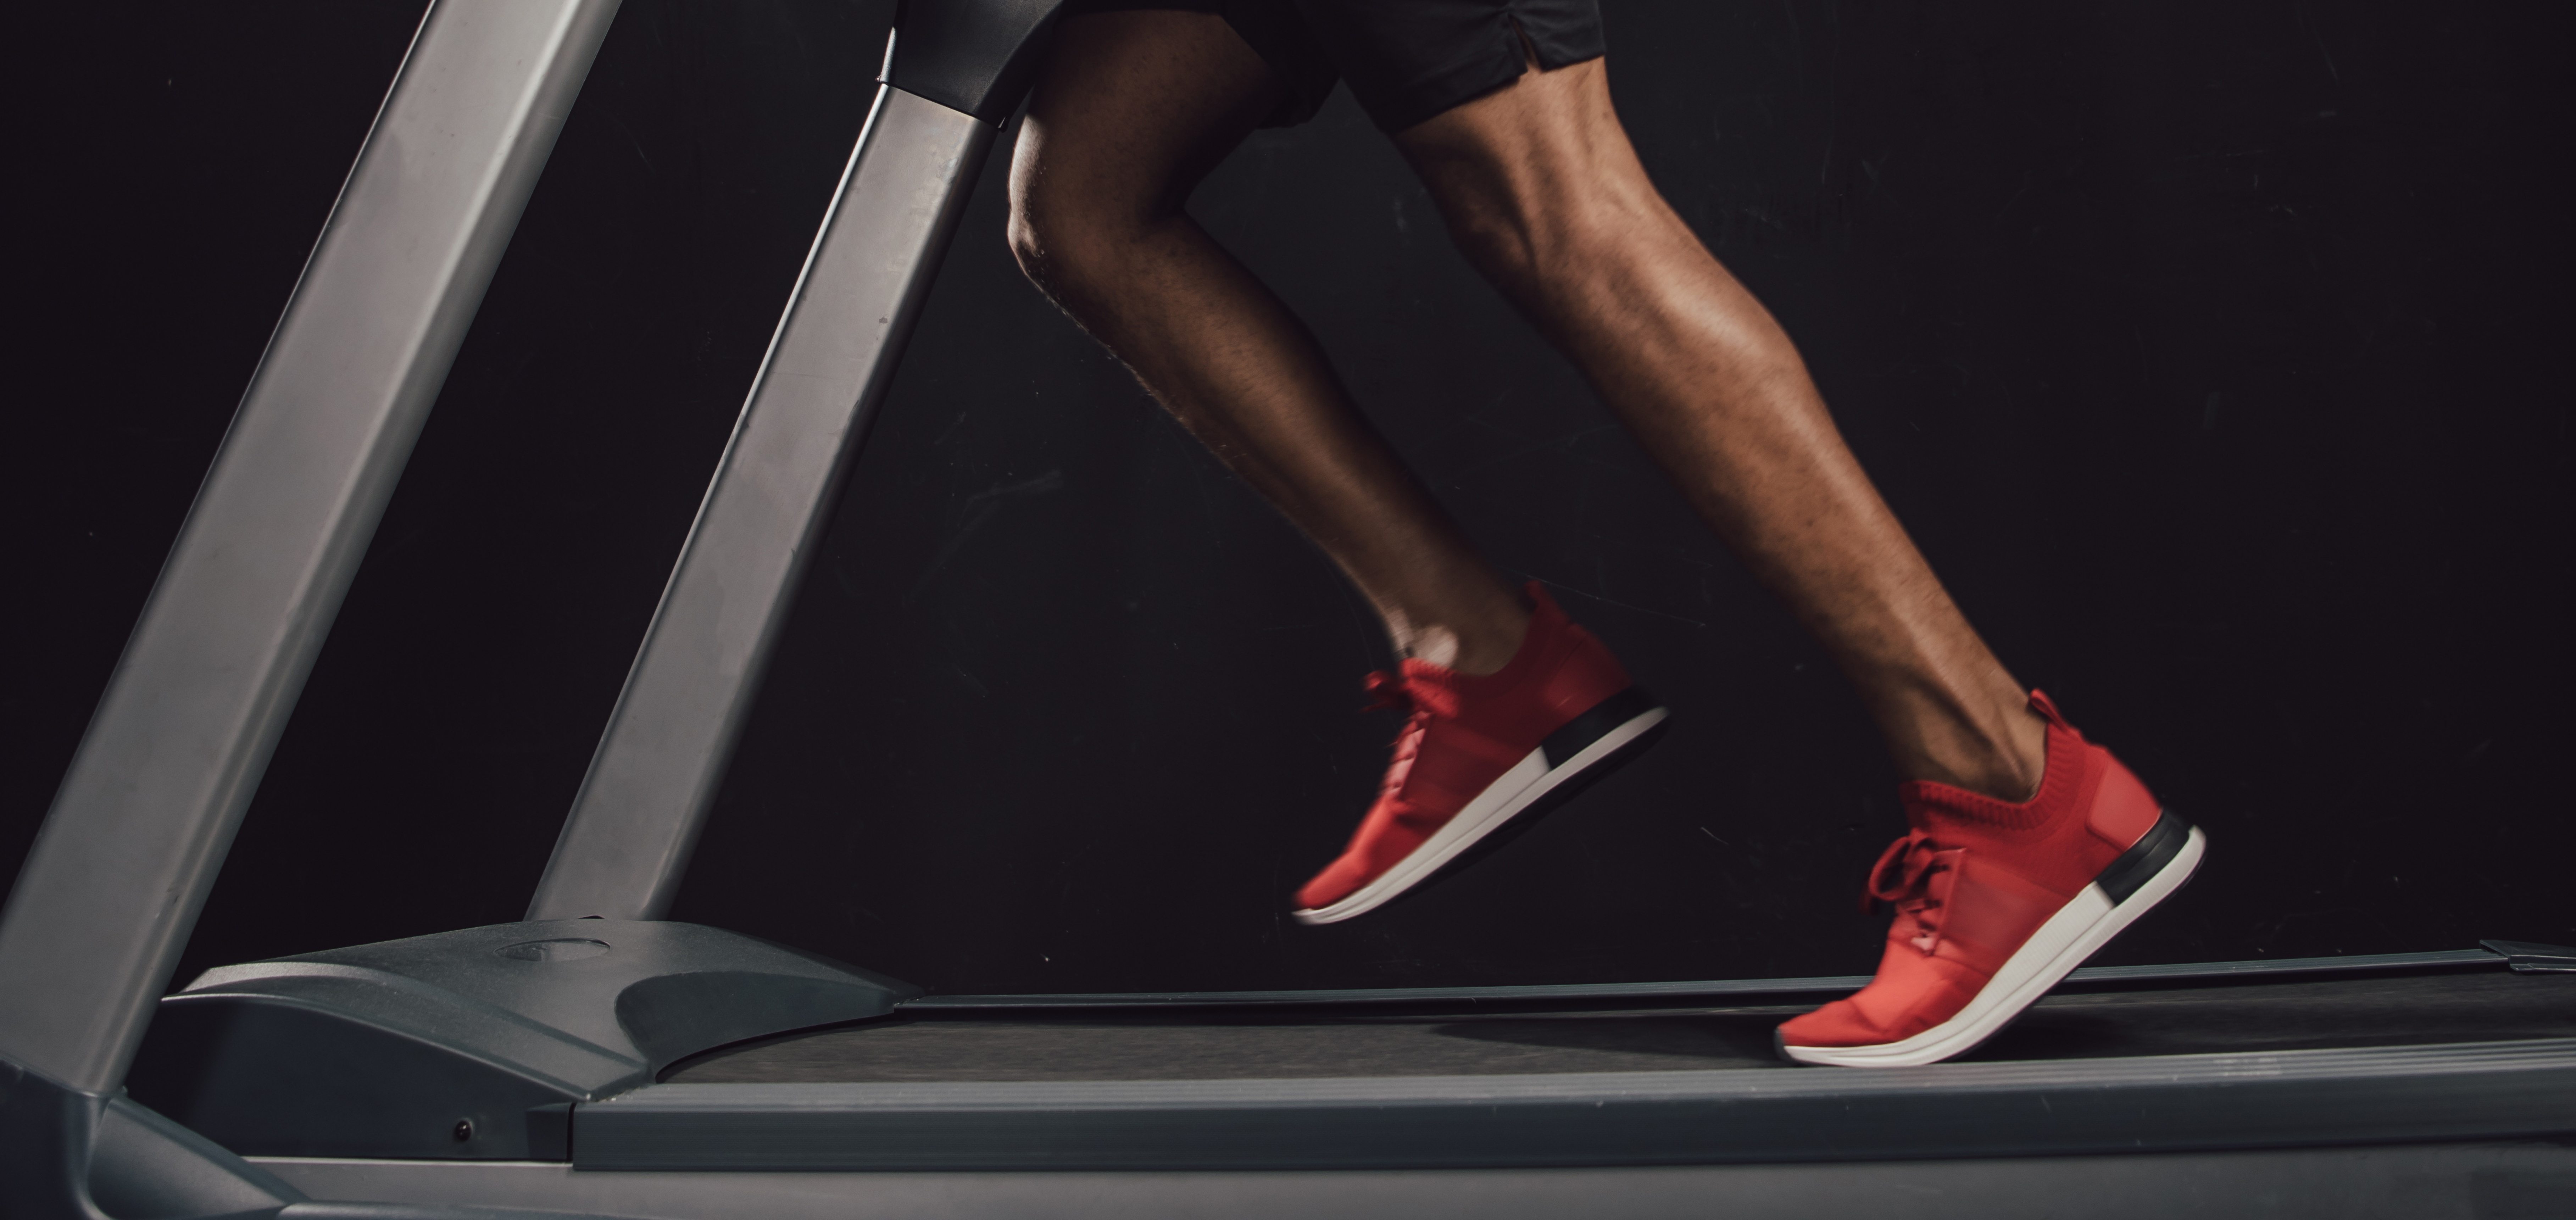 Treadmill Myths And Misconceptions